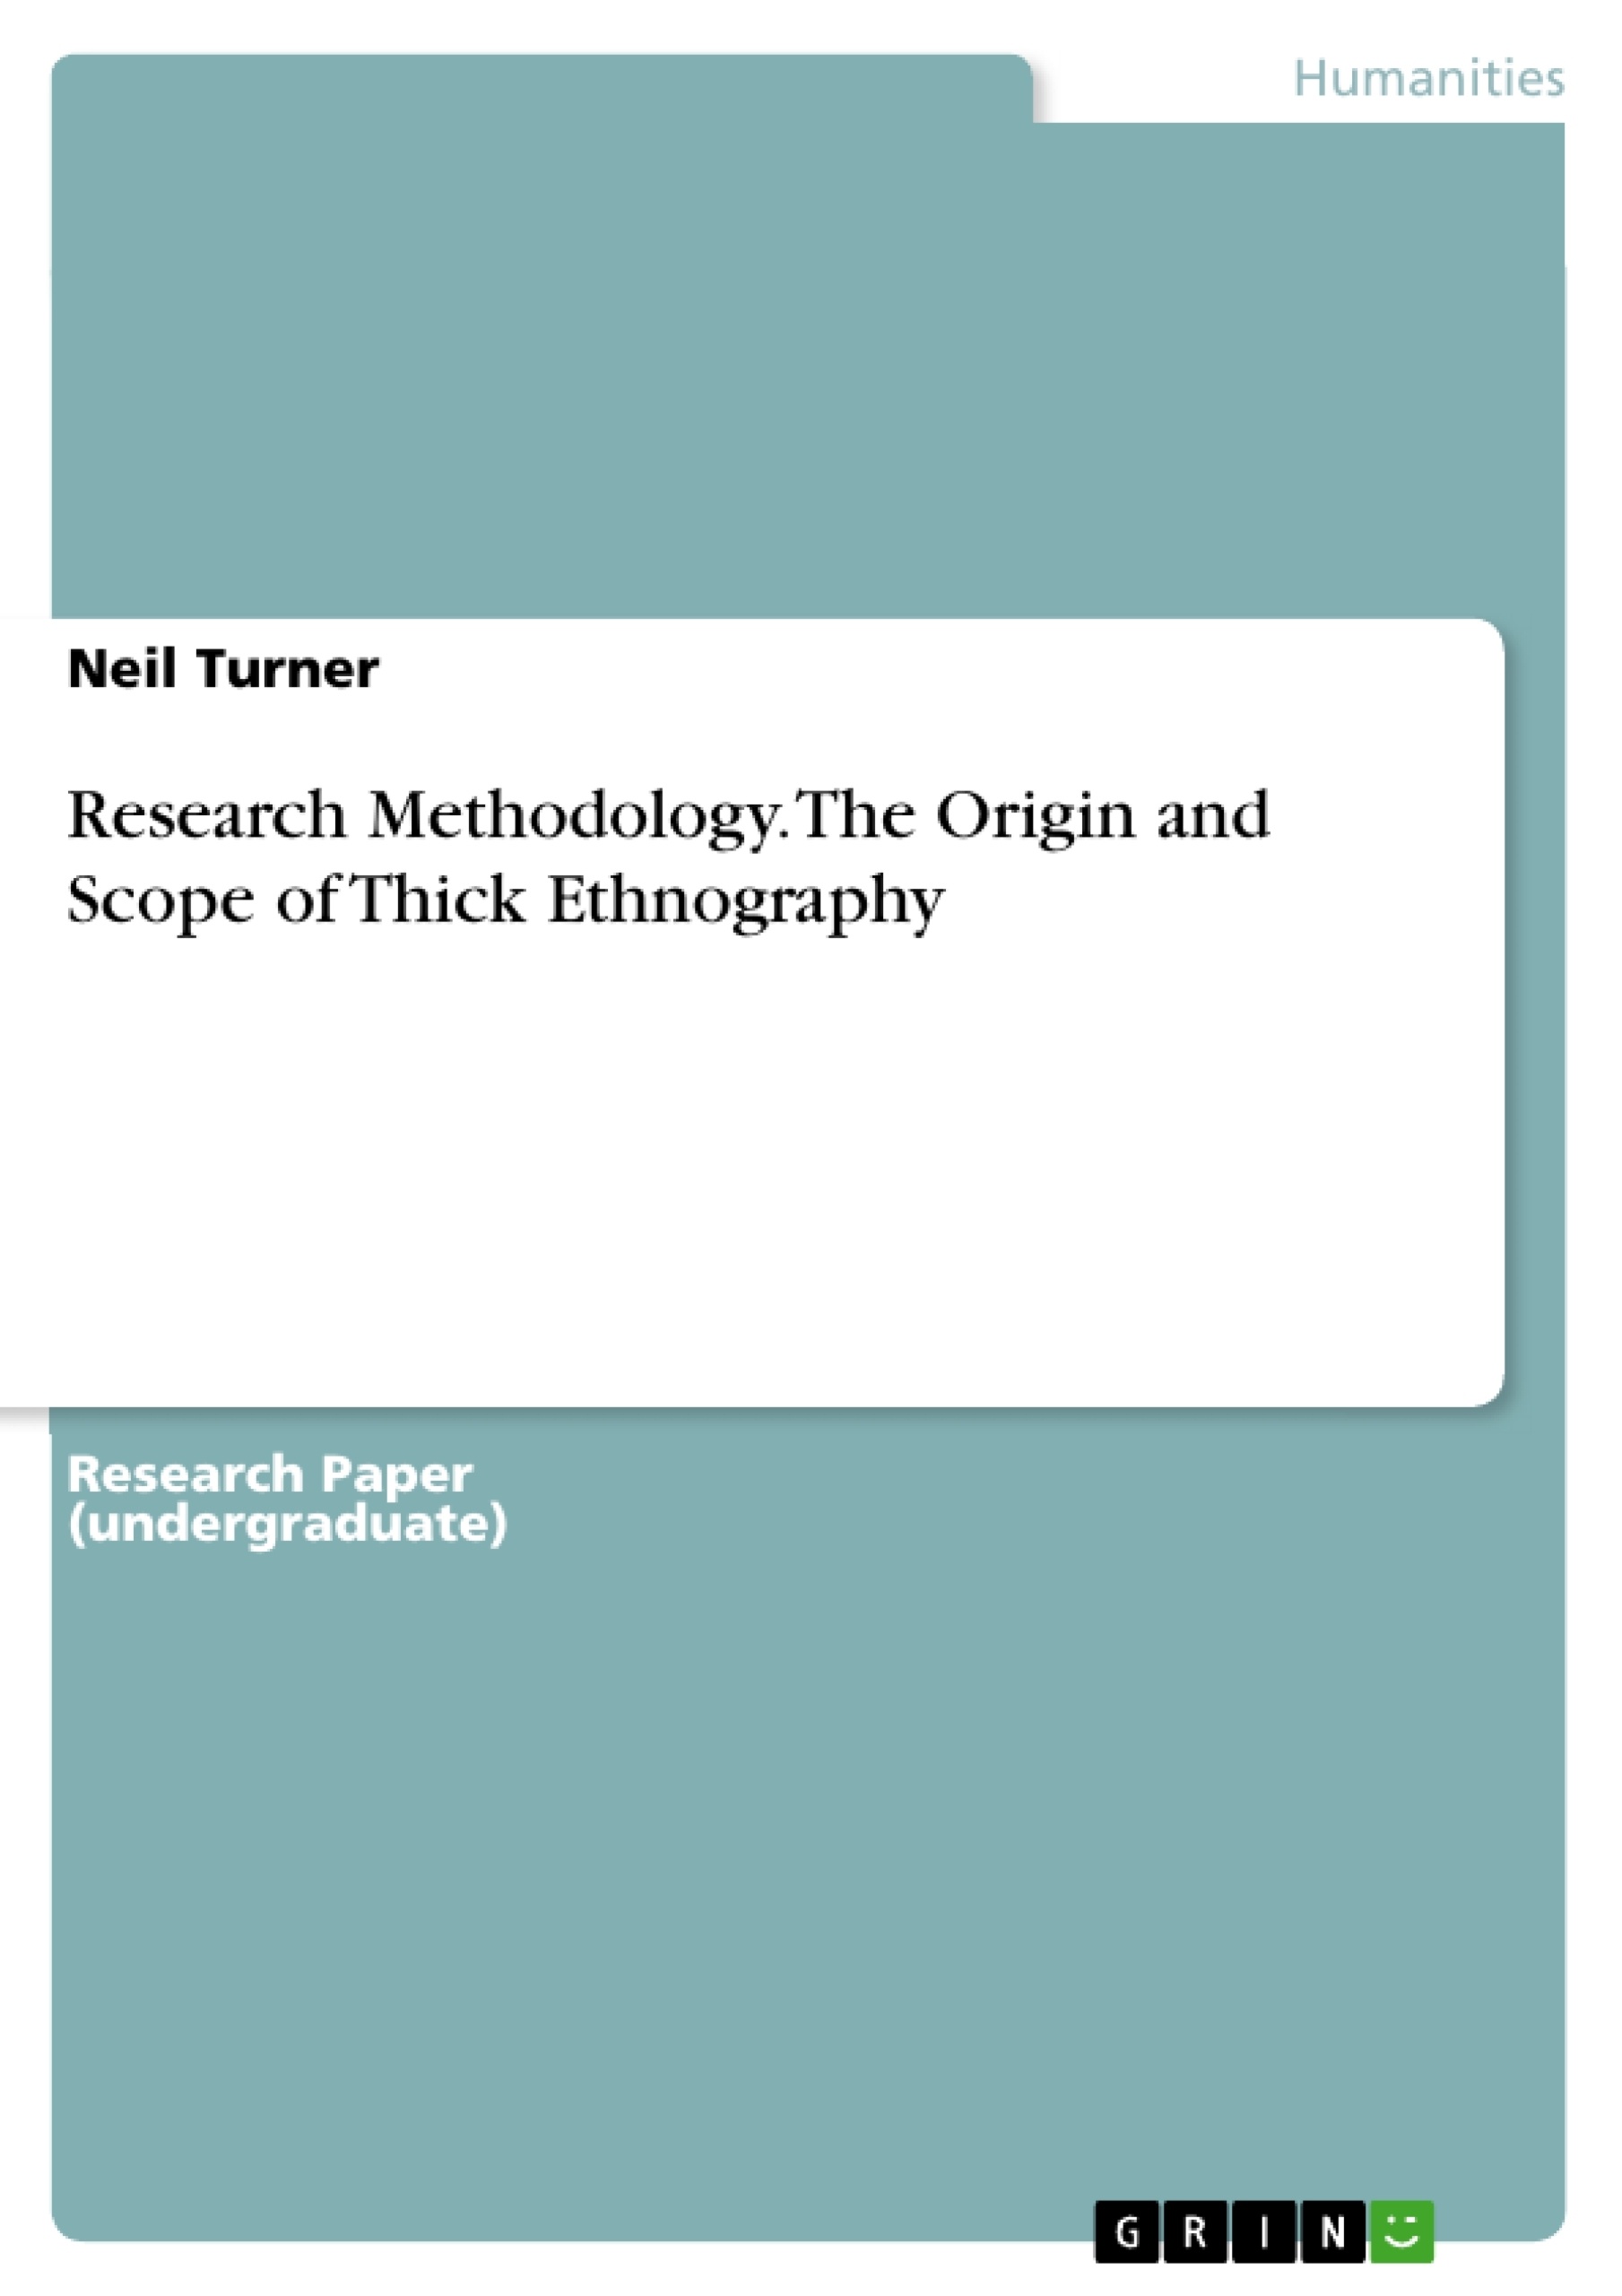 Titre: Research Methodology. The Origin and Scope of Thick Ethnography